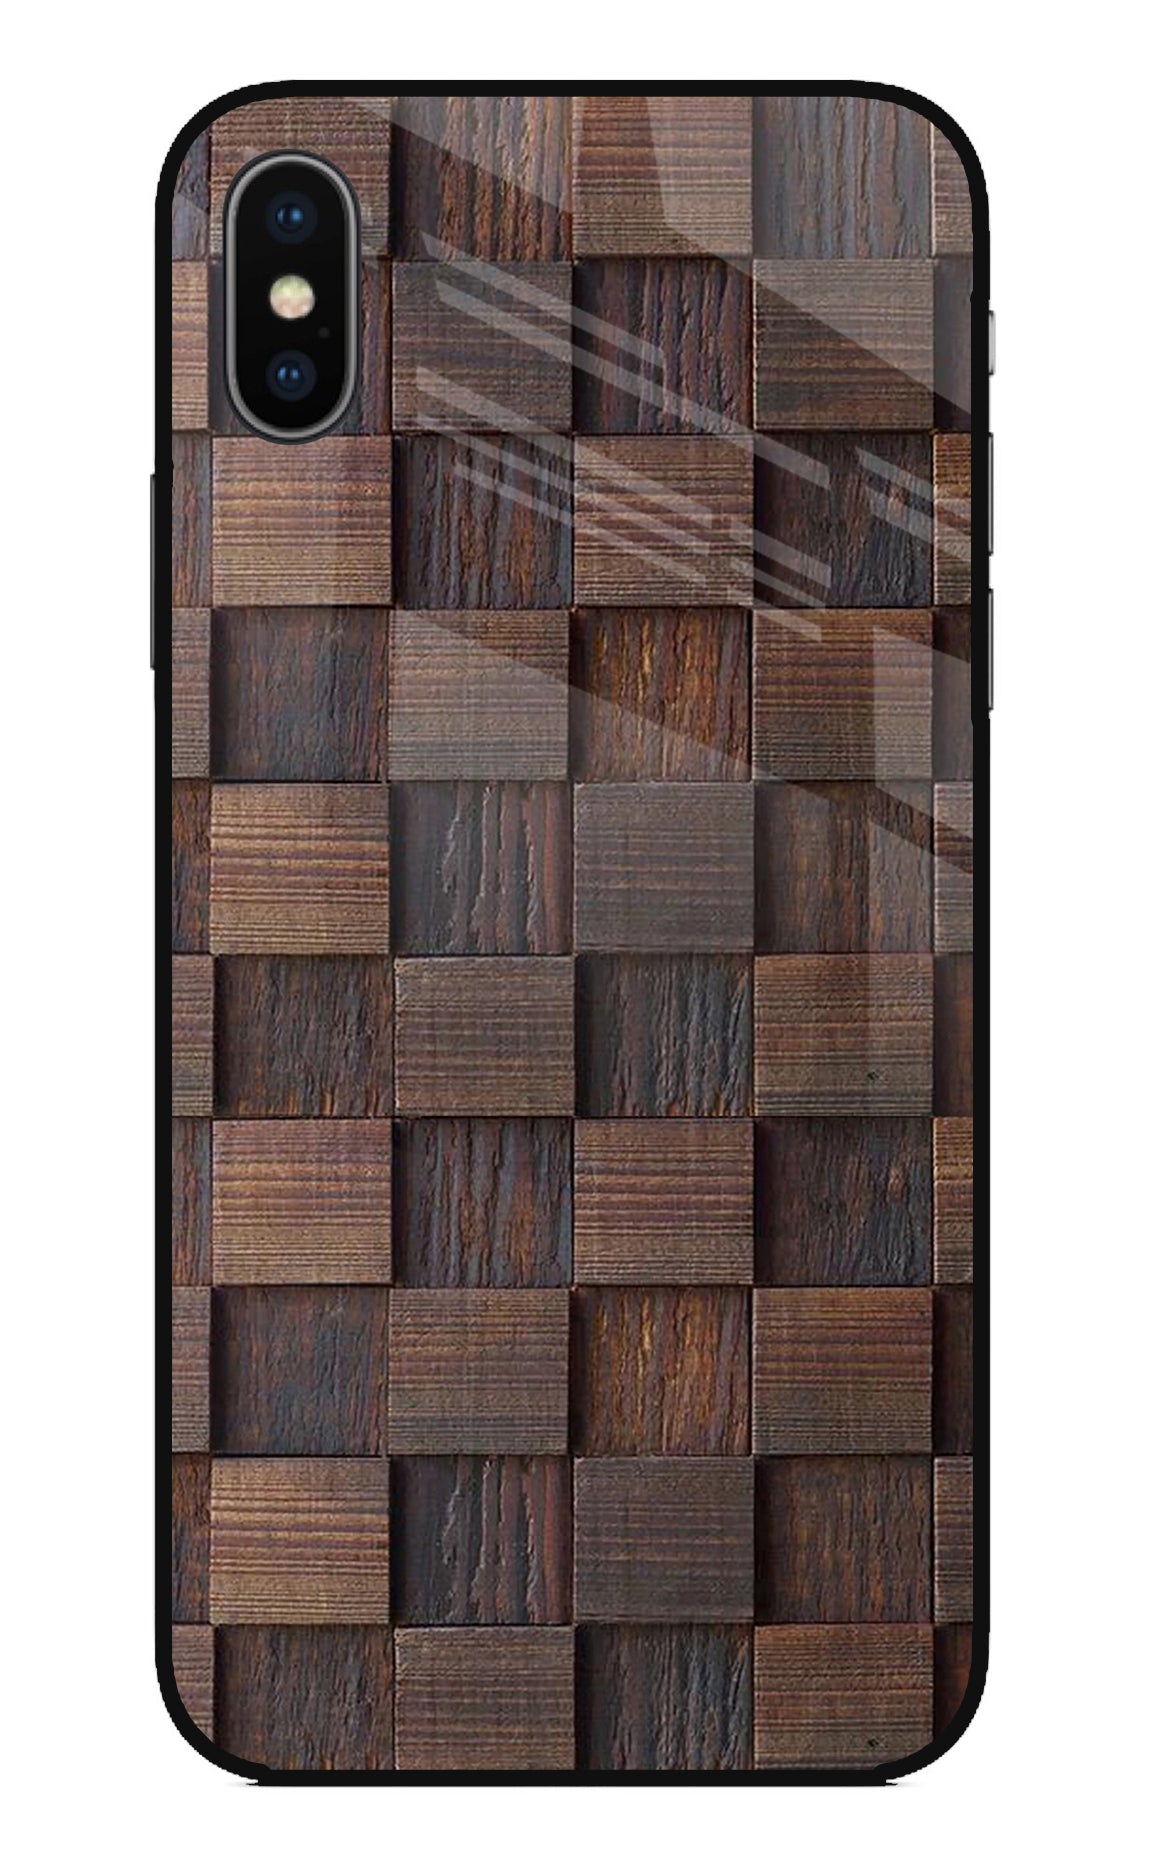 Wooden Cube Design iPhone XS Back Cover